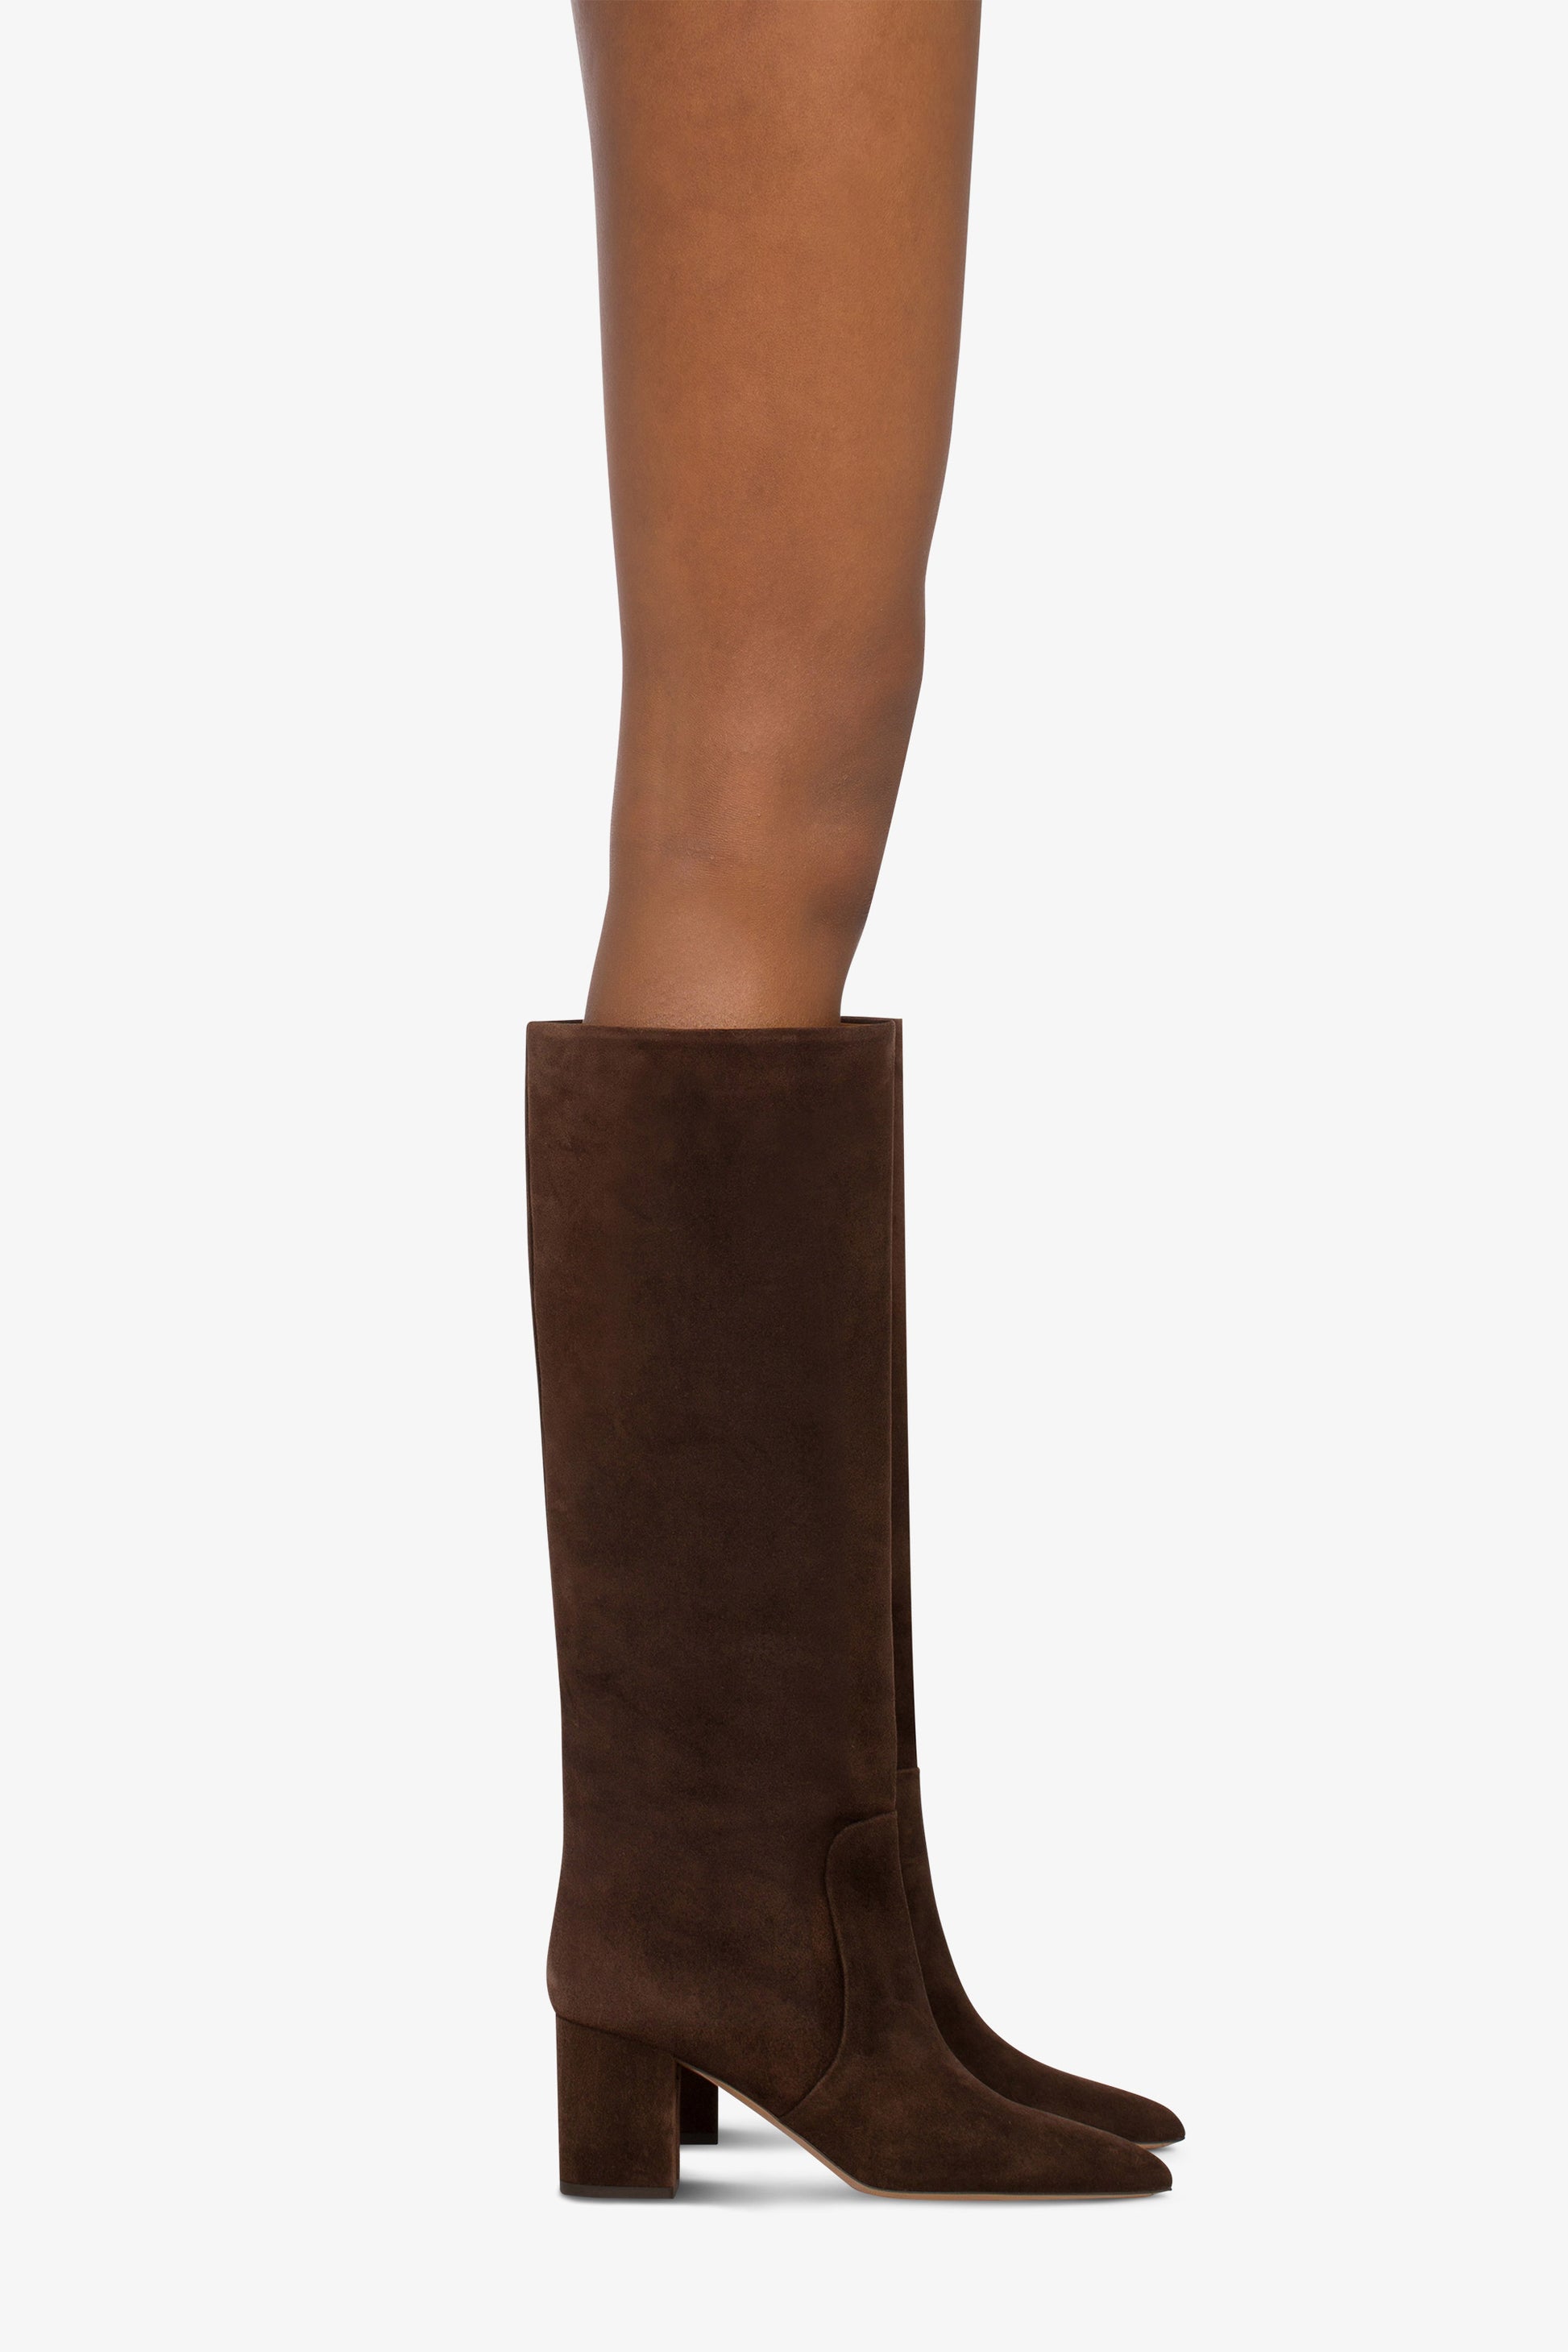 Knee-high boots in soft pepper suede leather - Producto usado